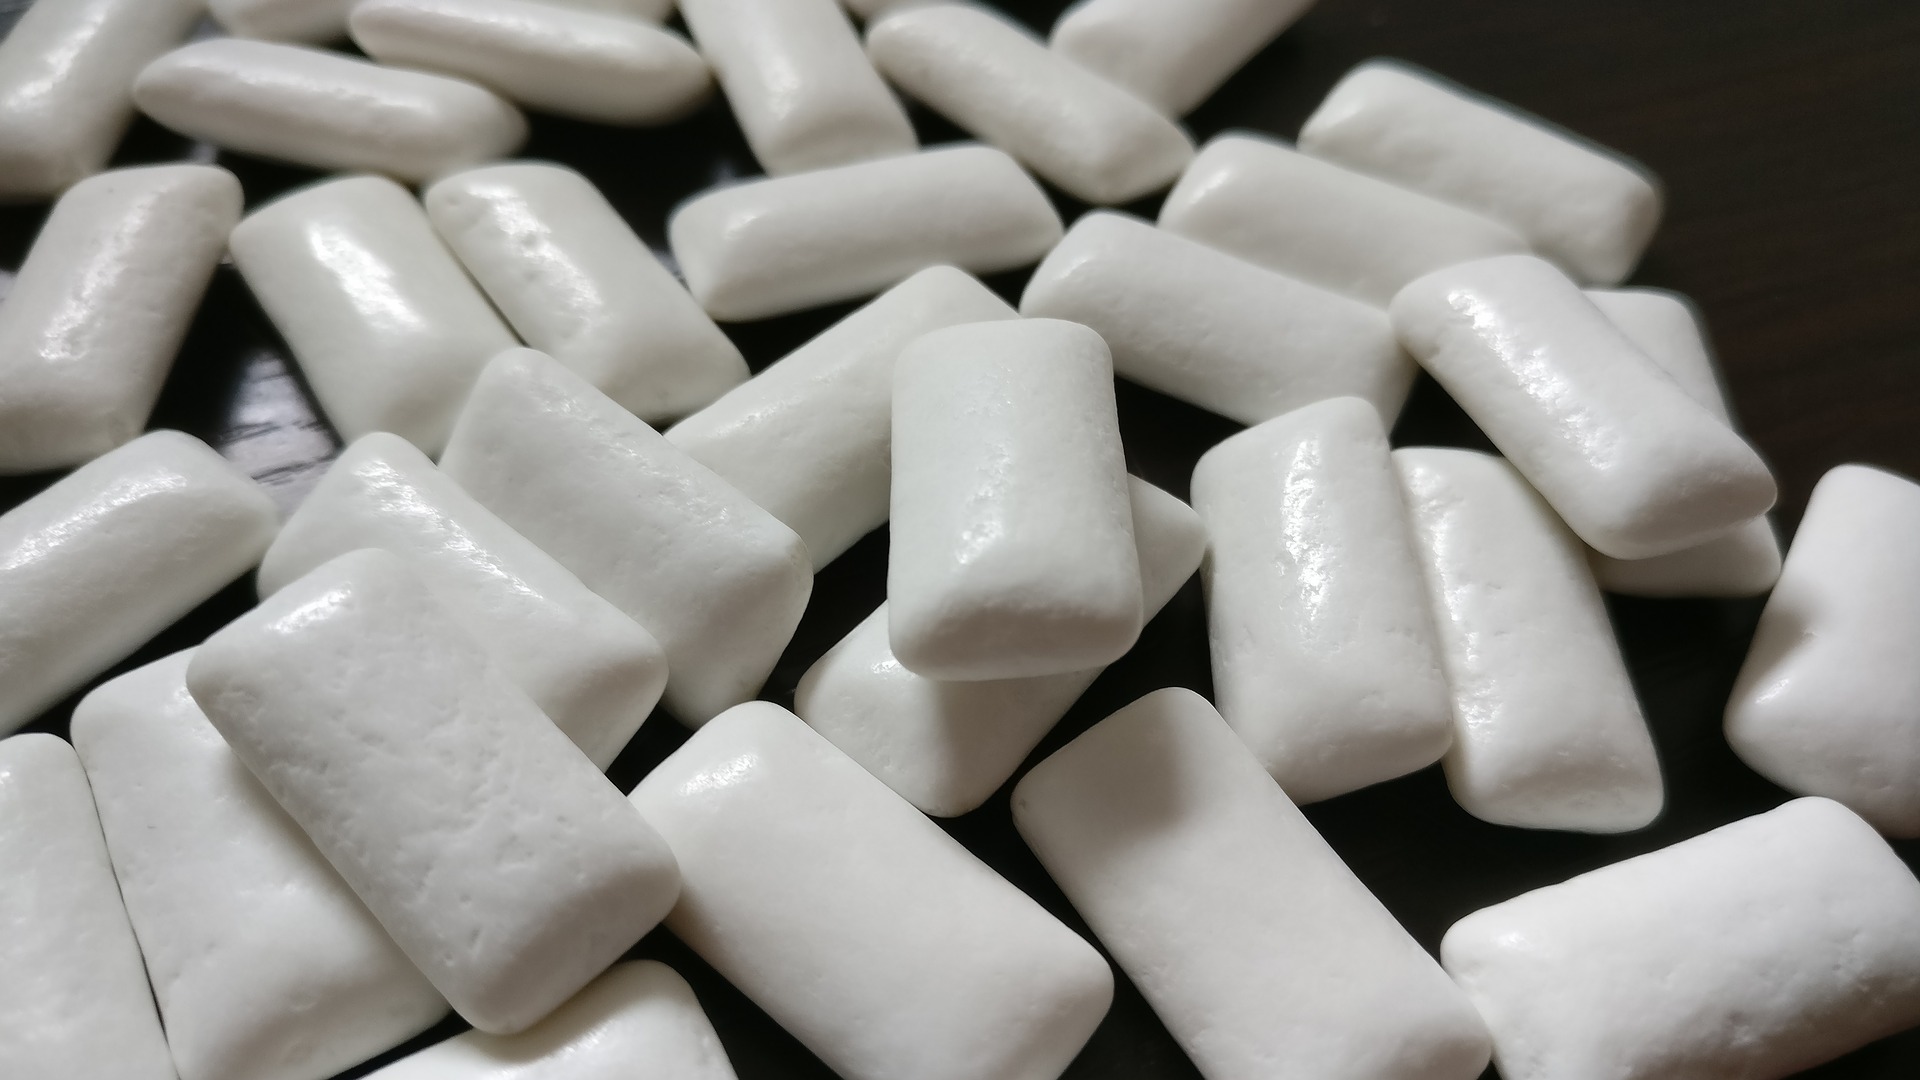 NCA says gum and mints drive down confectionery sales